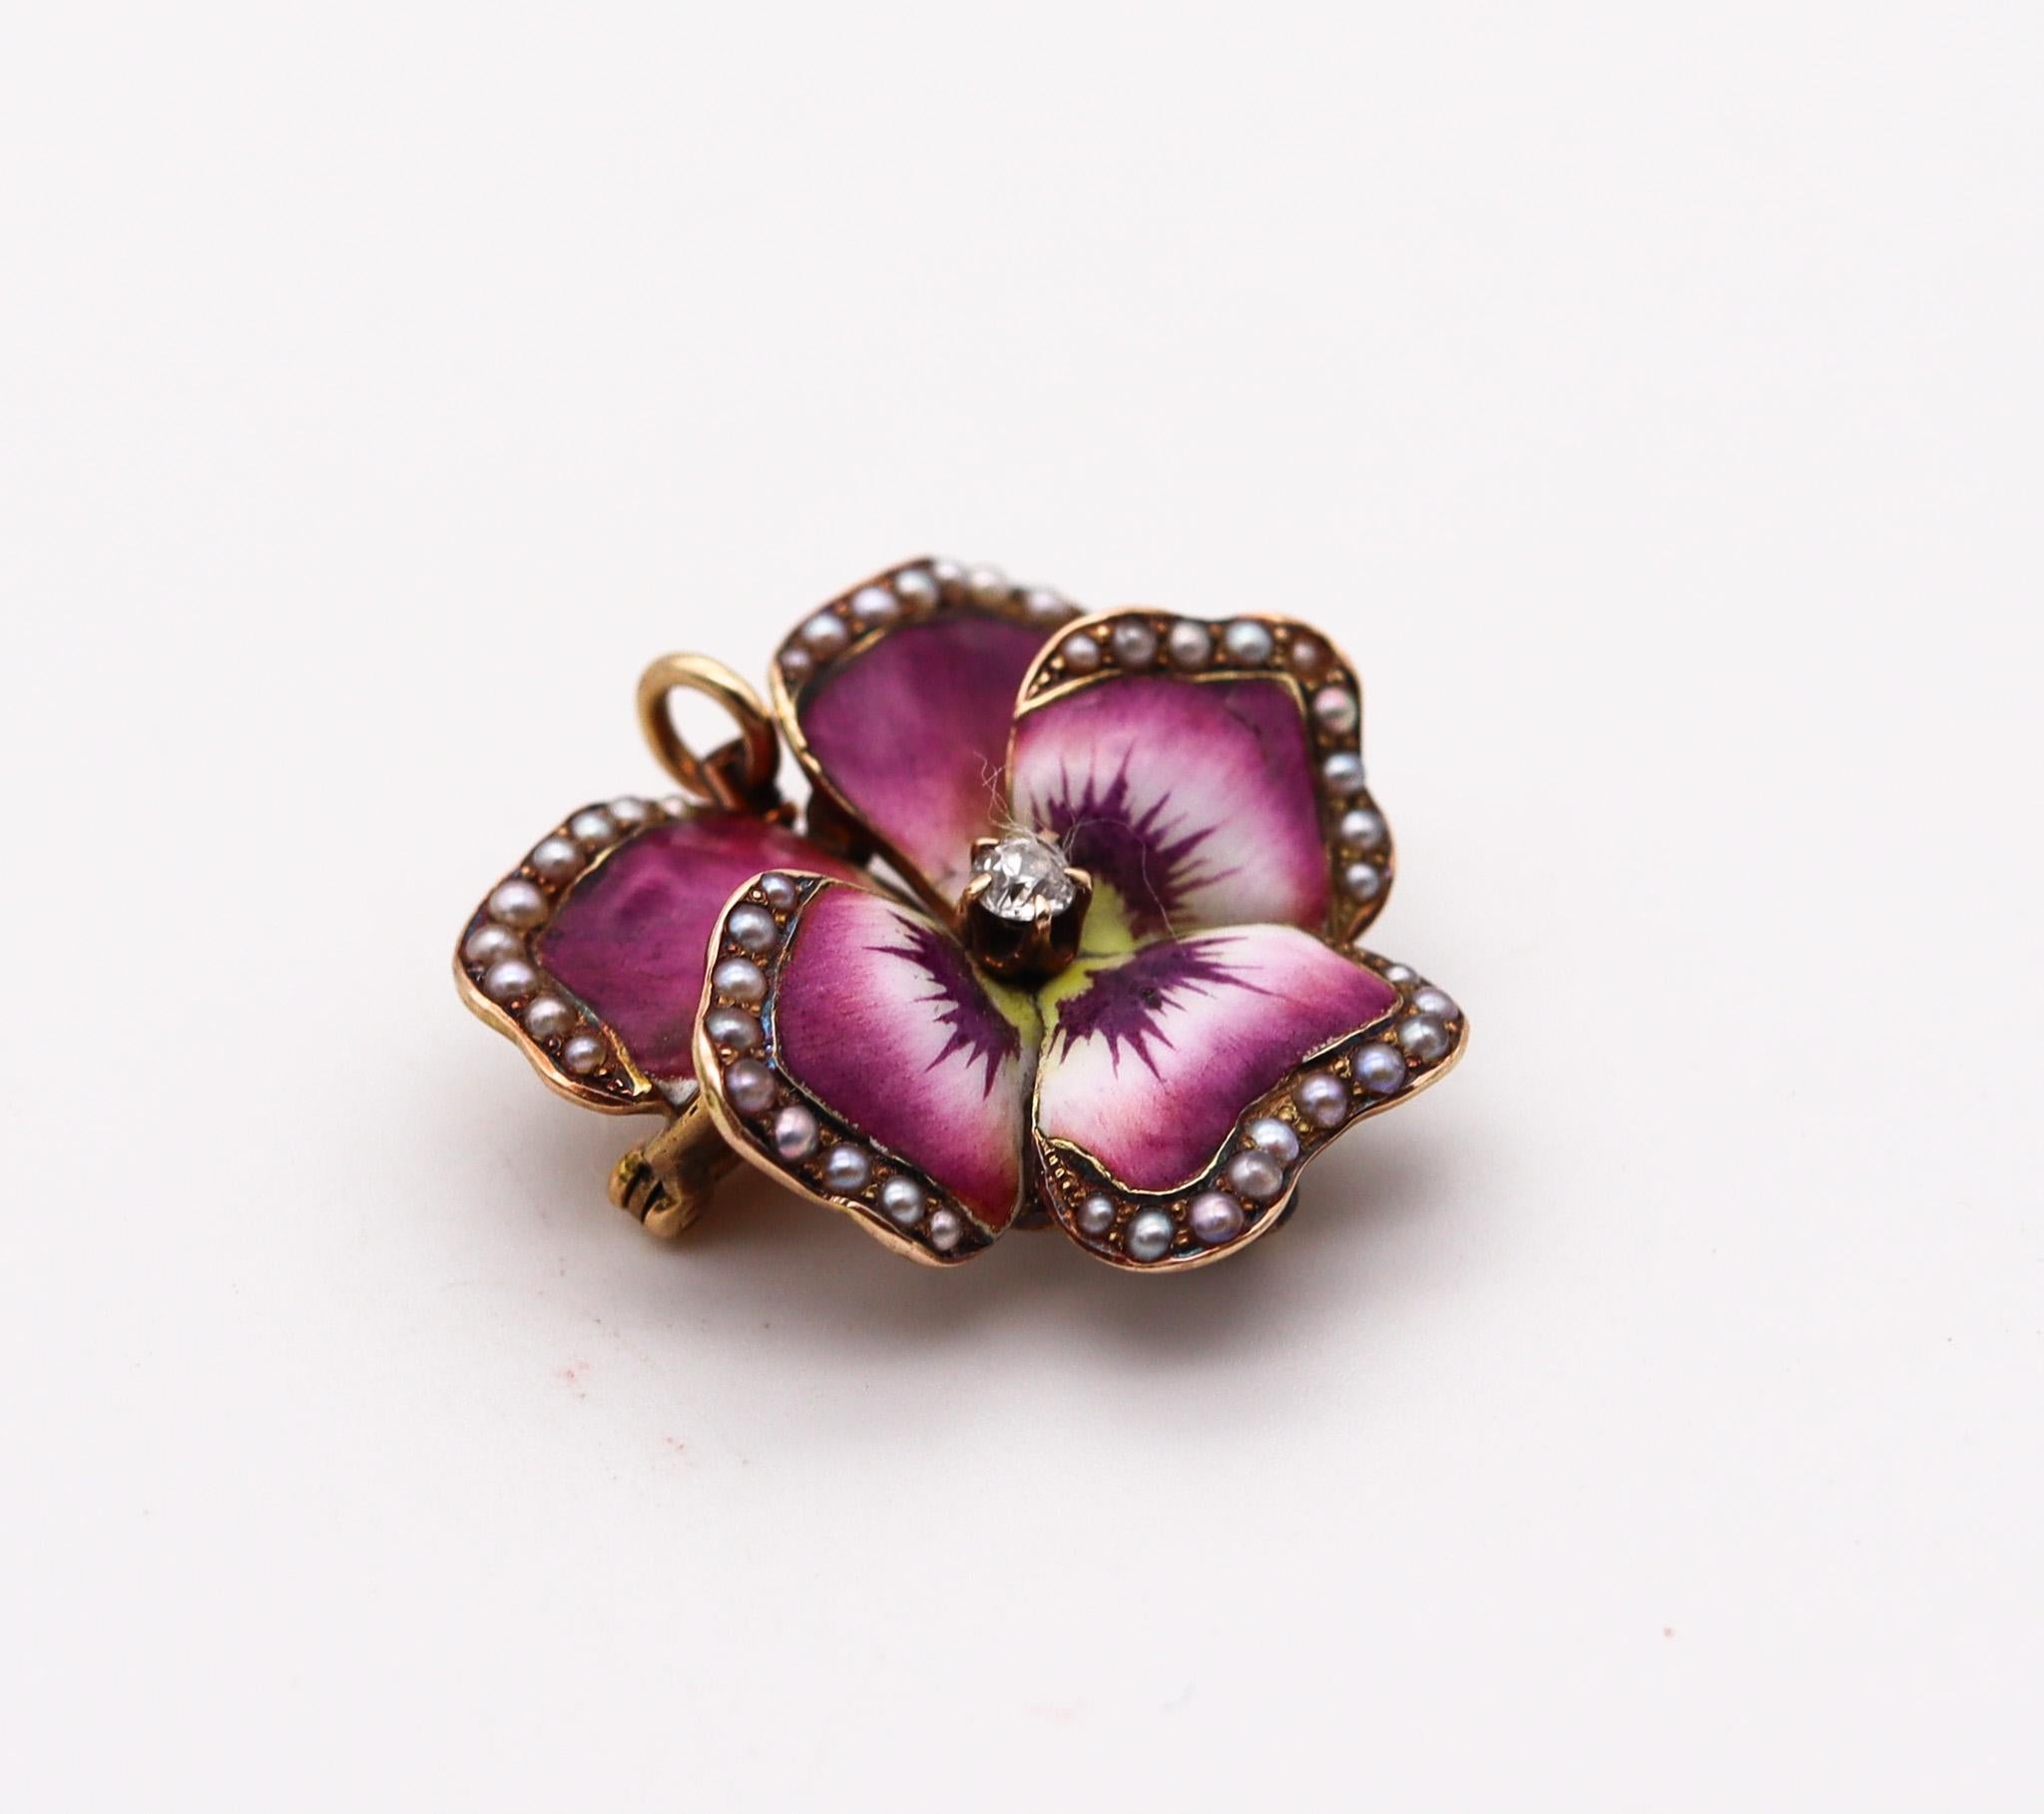 Edwardian Pansy convertible brooch designed by Crane & Theurer Inc.

A very beautiful piece, created in America during the Edwardian and the Art Nouveau periods, back in the 1900's. This outstanding convertible pendant-brooch has been carefully